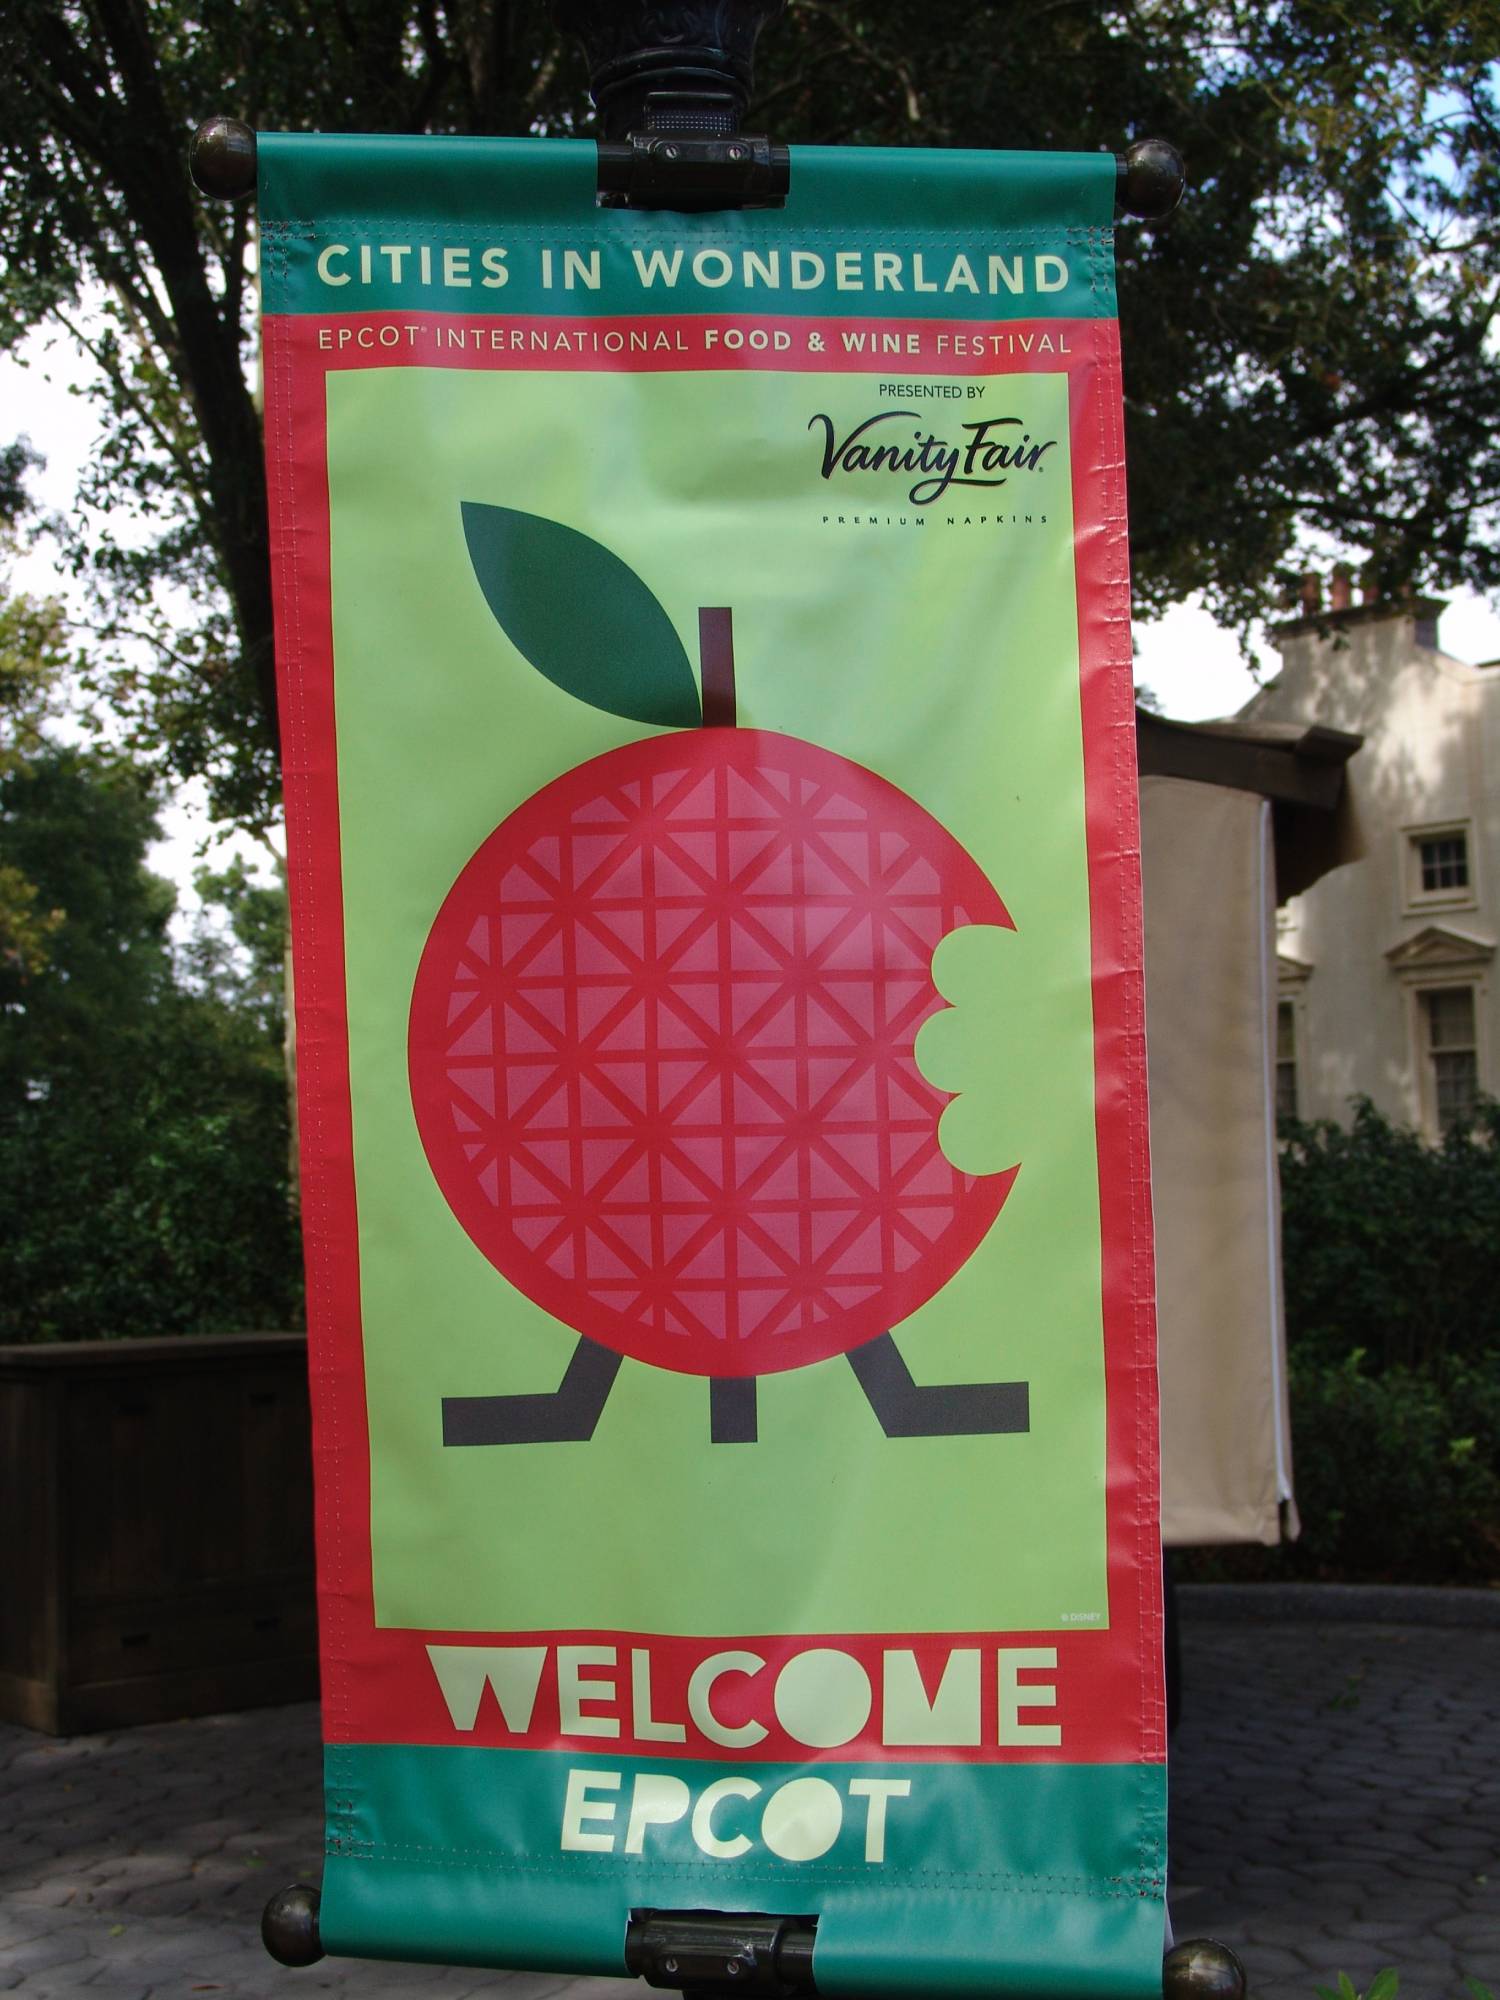 Epcot - Food and Wine Festival